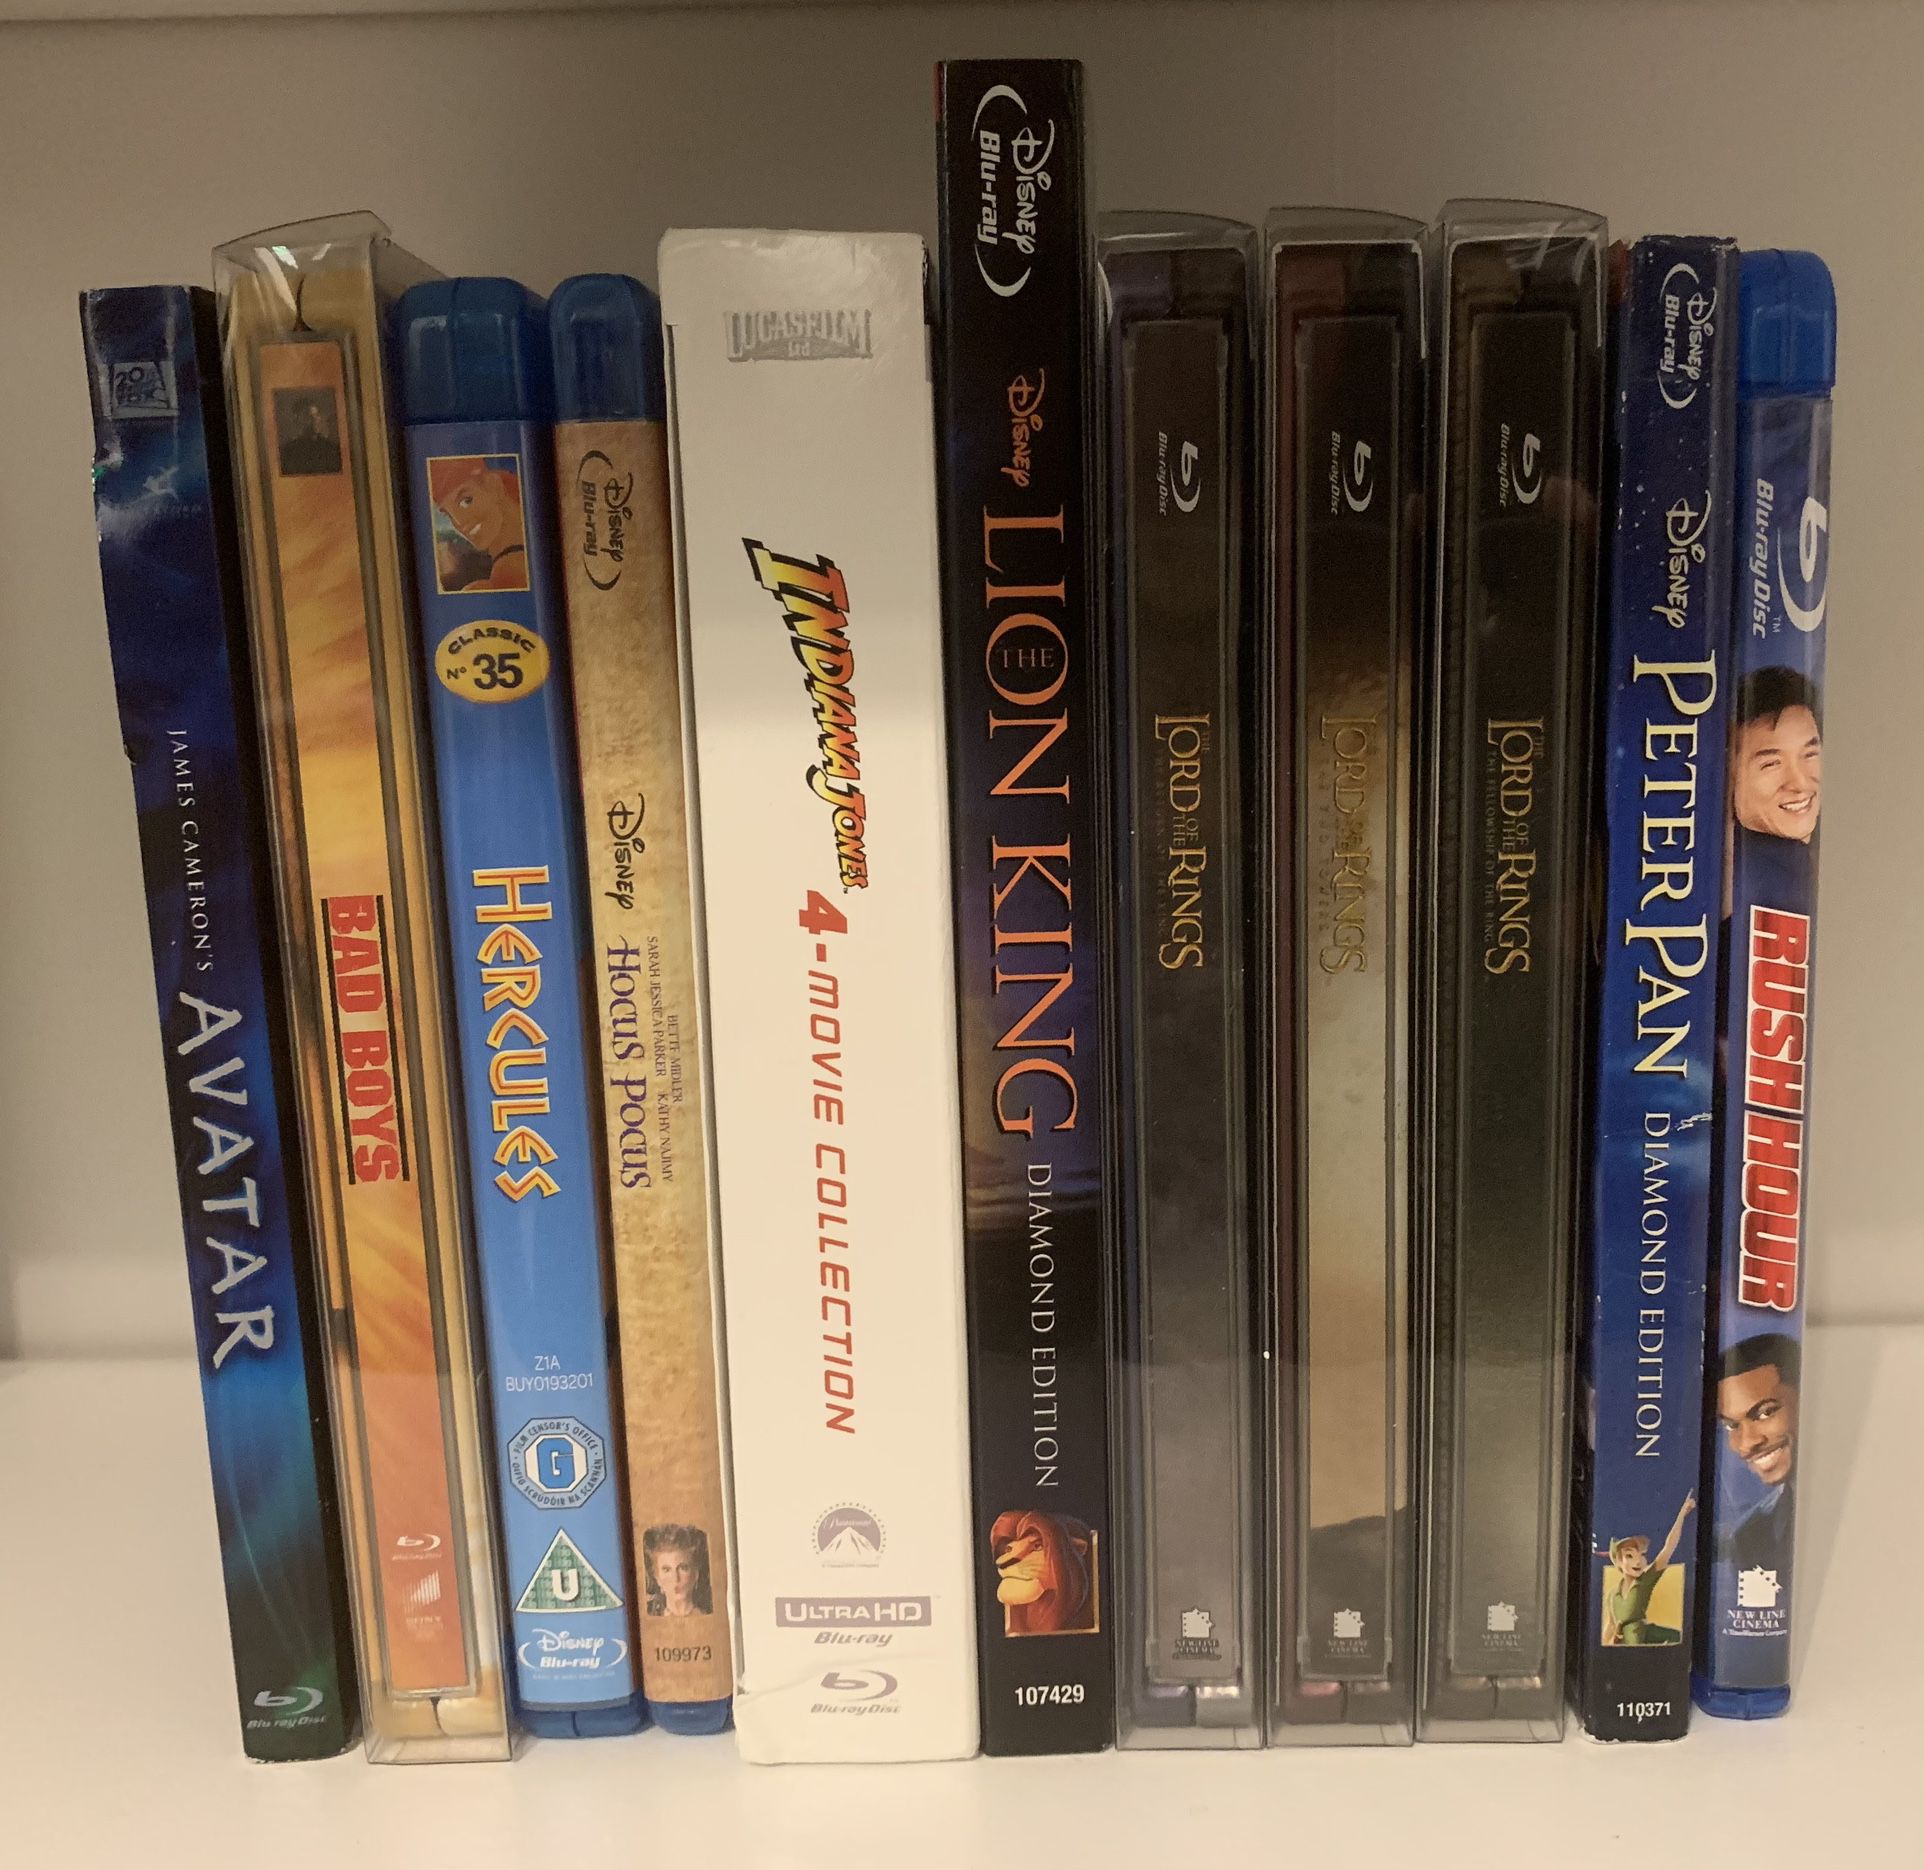 Blu-rays (see description for pricing)